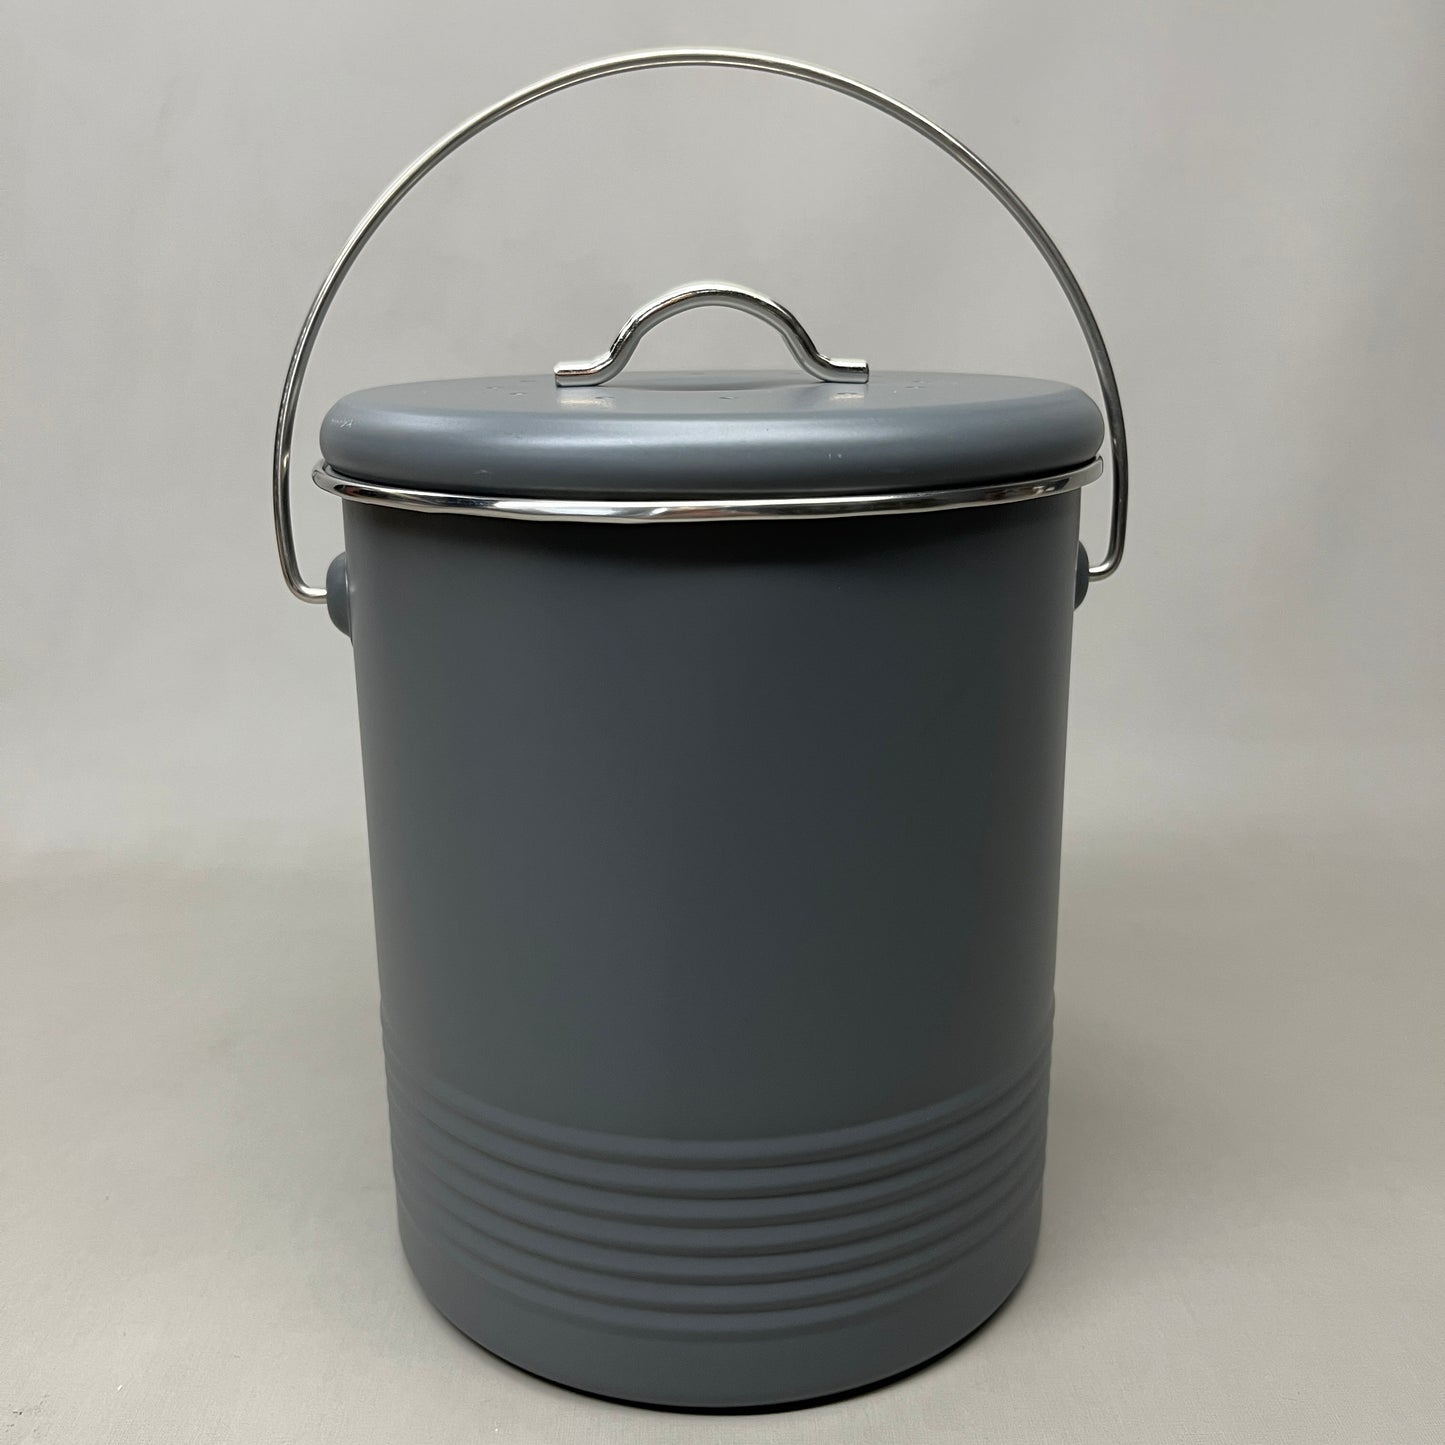 NOW DESIGNS Compost Bin Charcoal Filter Included 7" x 8 1/2" Gray 5123004 (New)